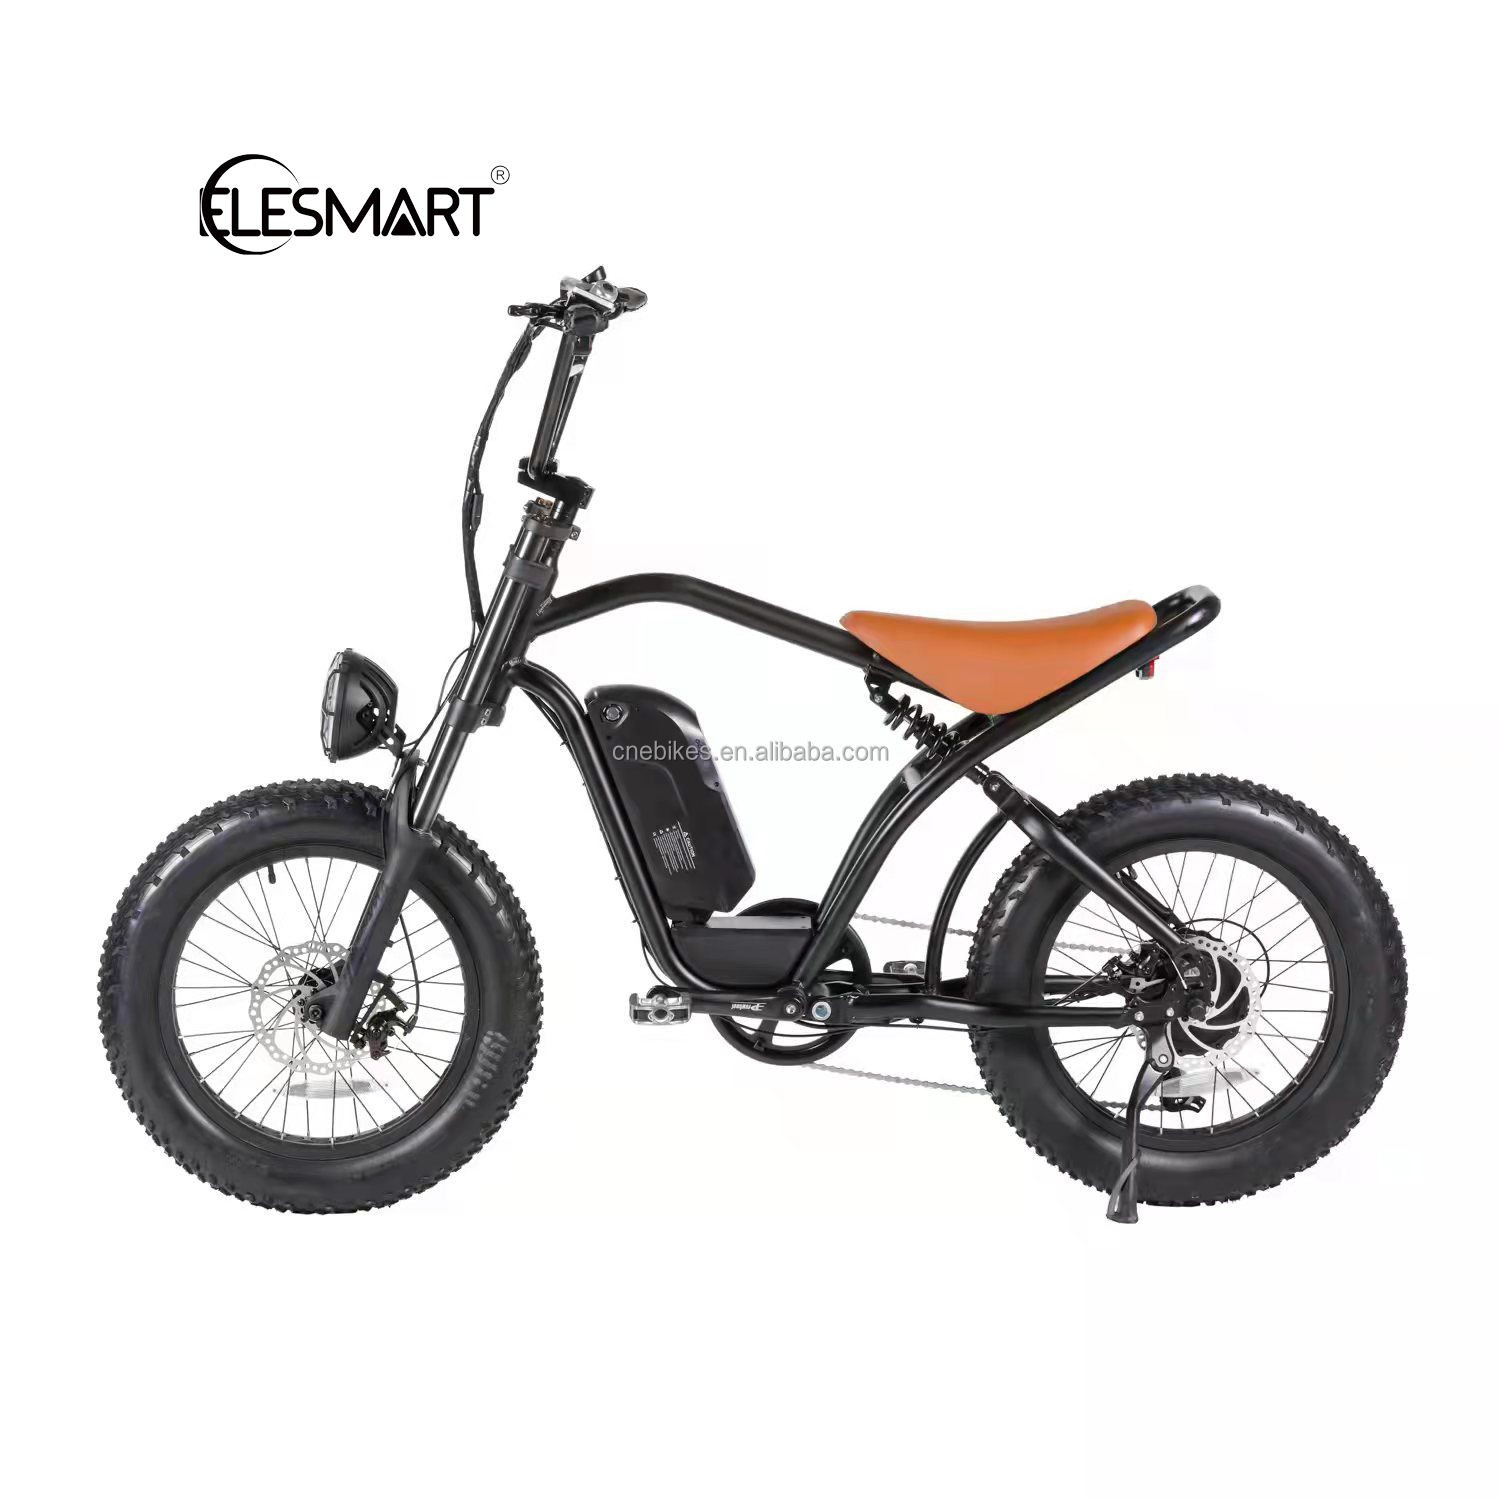 Cnebikes Manufacture 16" 24V 10AH Electric Vintage Mountain Ebike Electric Bicycle 20km/h Adult Electric Bicycle Bike CT16A